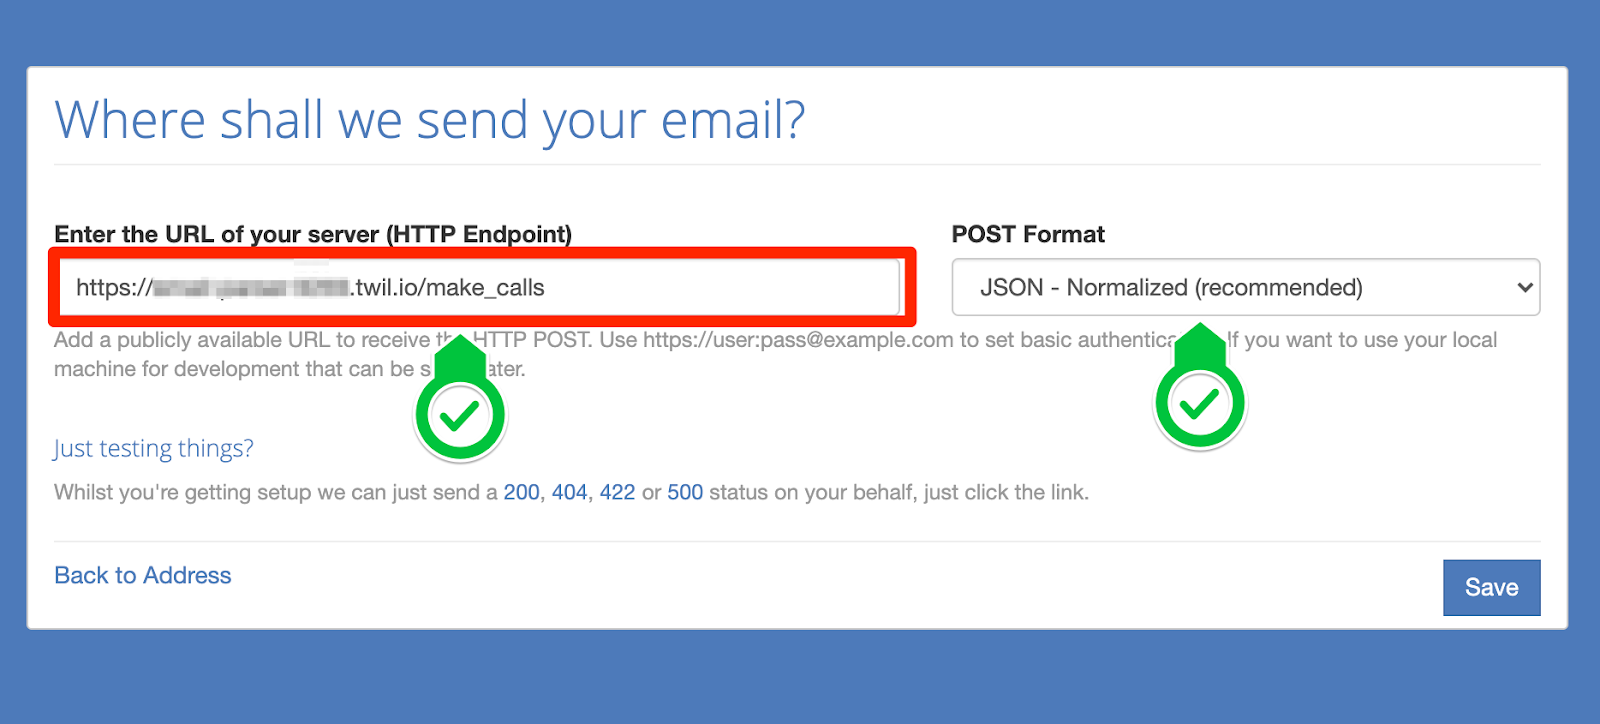 Screenshot of CLoud MailIn Settings: Configure URL of HTTP Endpoint for Emails